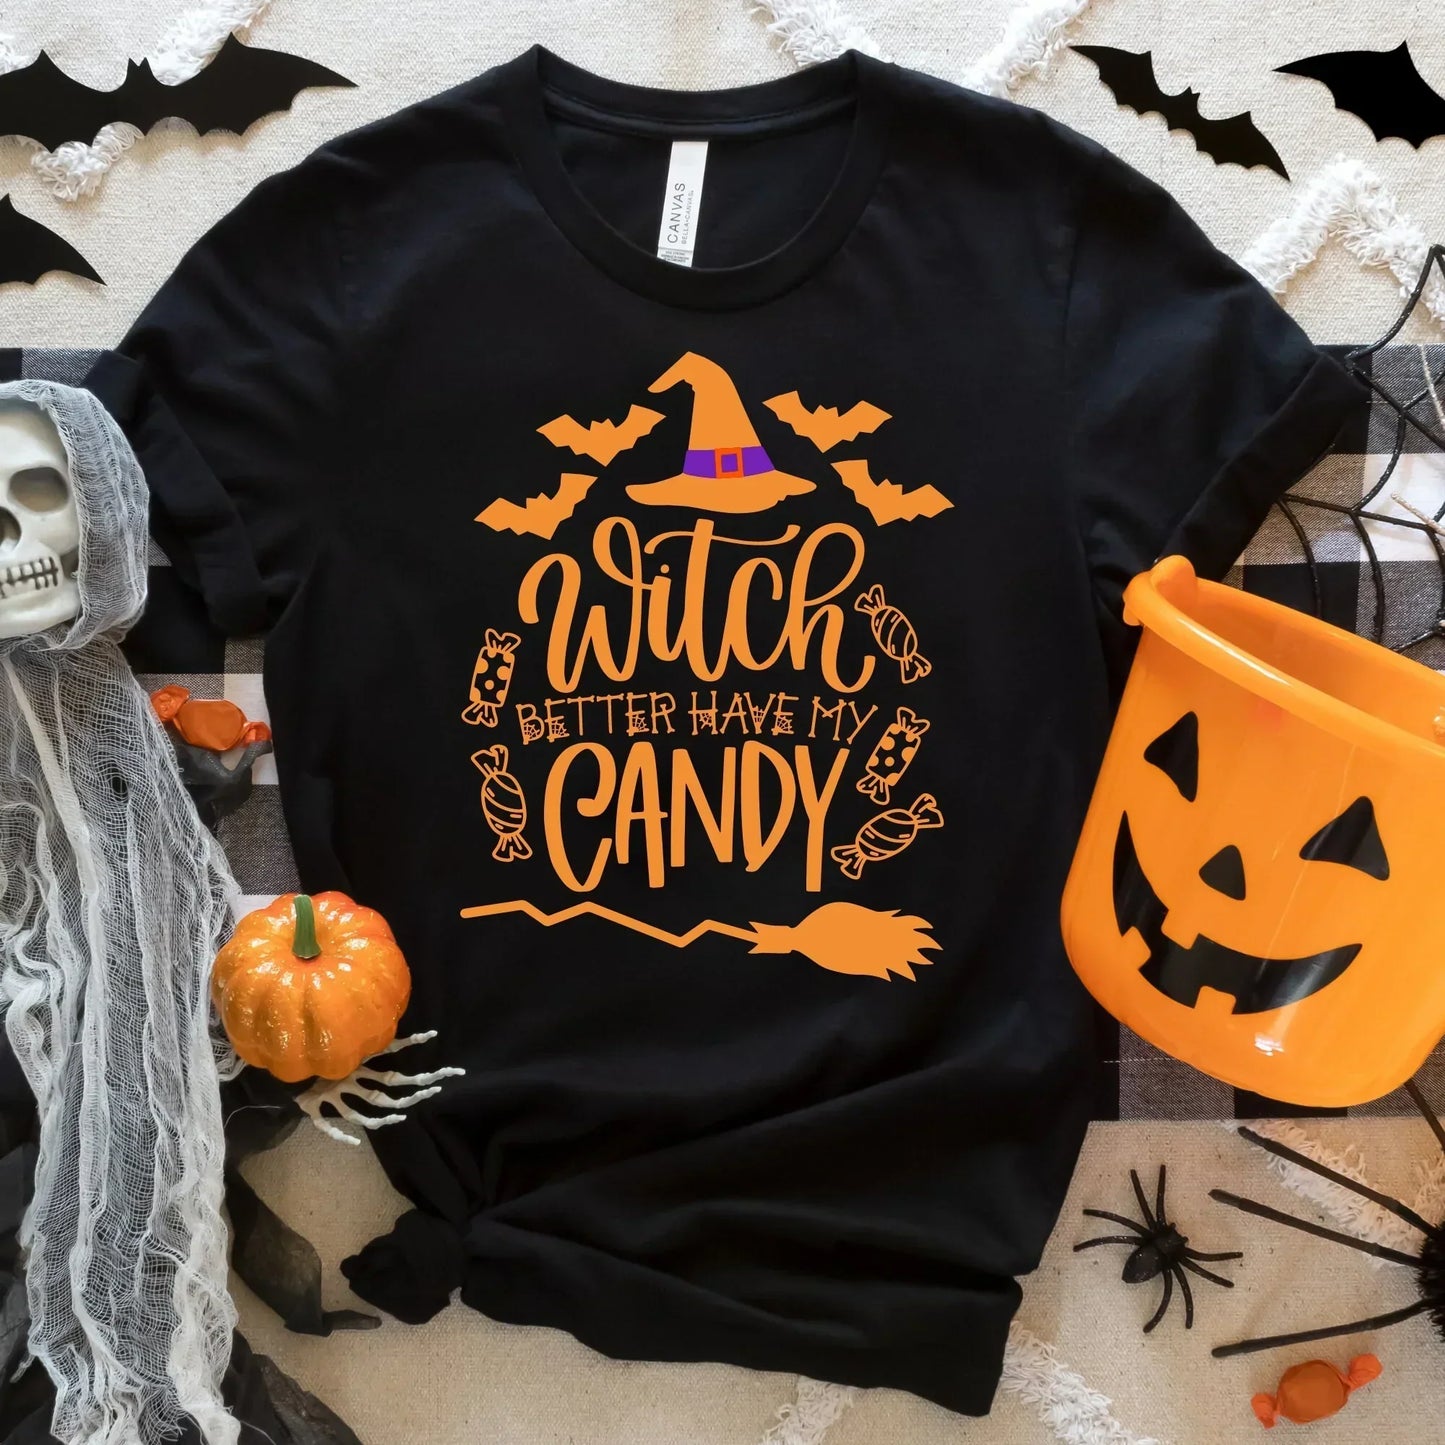 Halloween Shirt, Halloween Sweater, Witch Better Have my Candy, Funny Halloween Party Crewneck, Cute Trick or Treat Halloween Sweatshirt